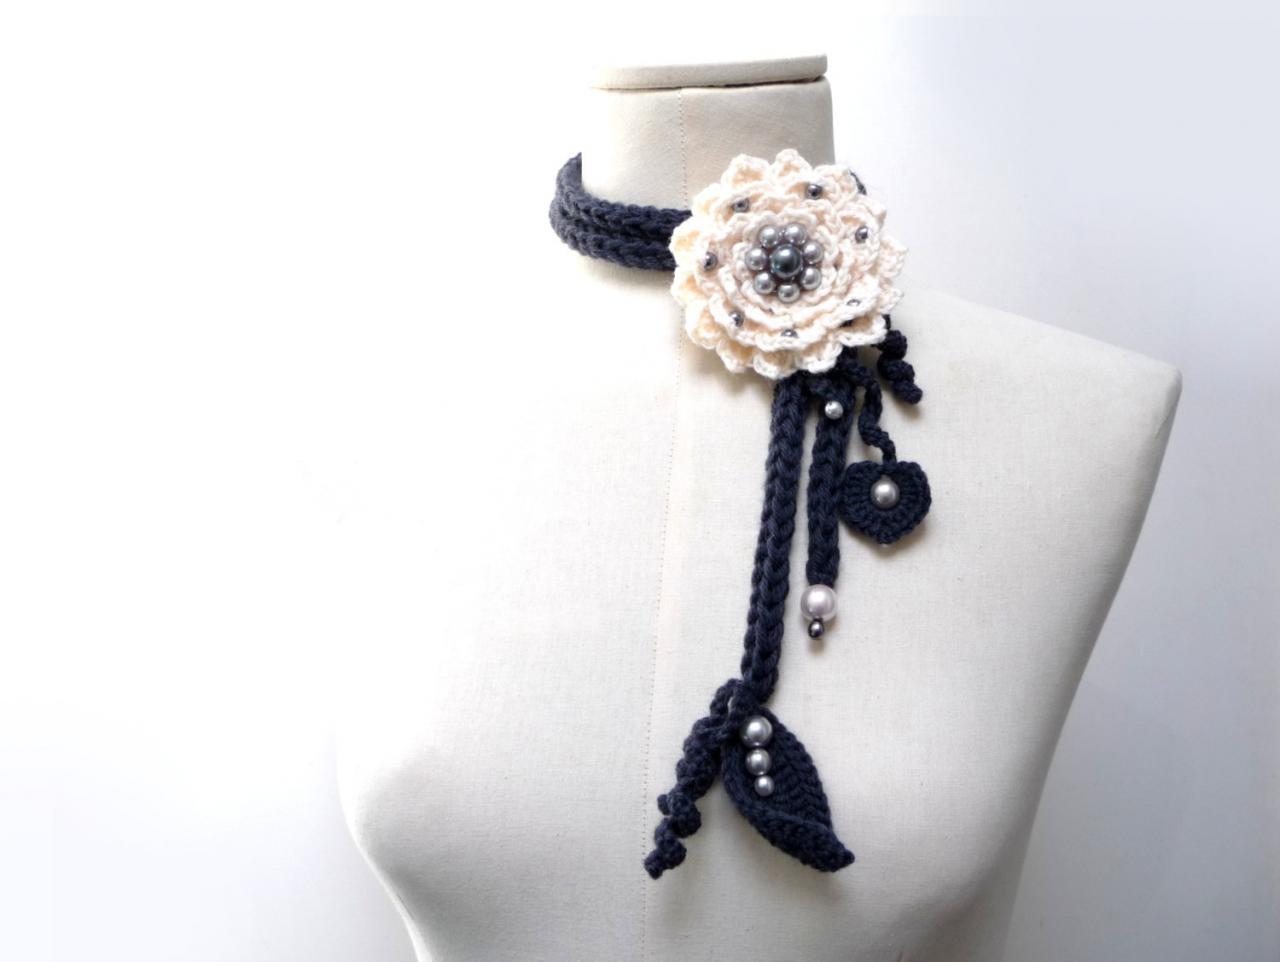 Crochet Lariat Necklace - Cream White Flower And Grey Leaves With Glass Pearls - Made To Order - Little Peony